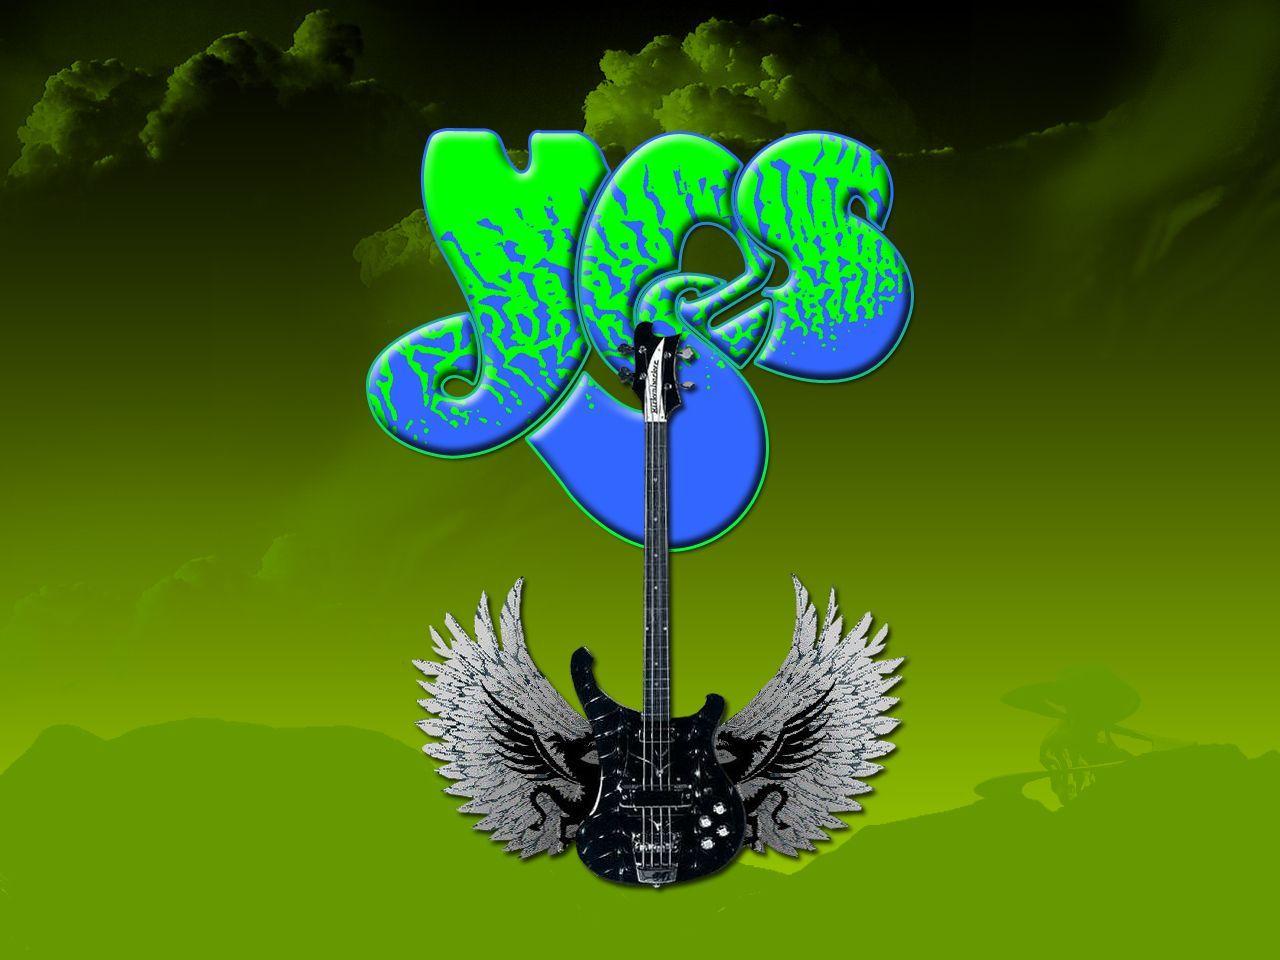 Yes Band Wallpaper. Rock of Ages